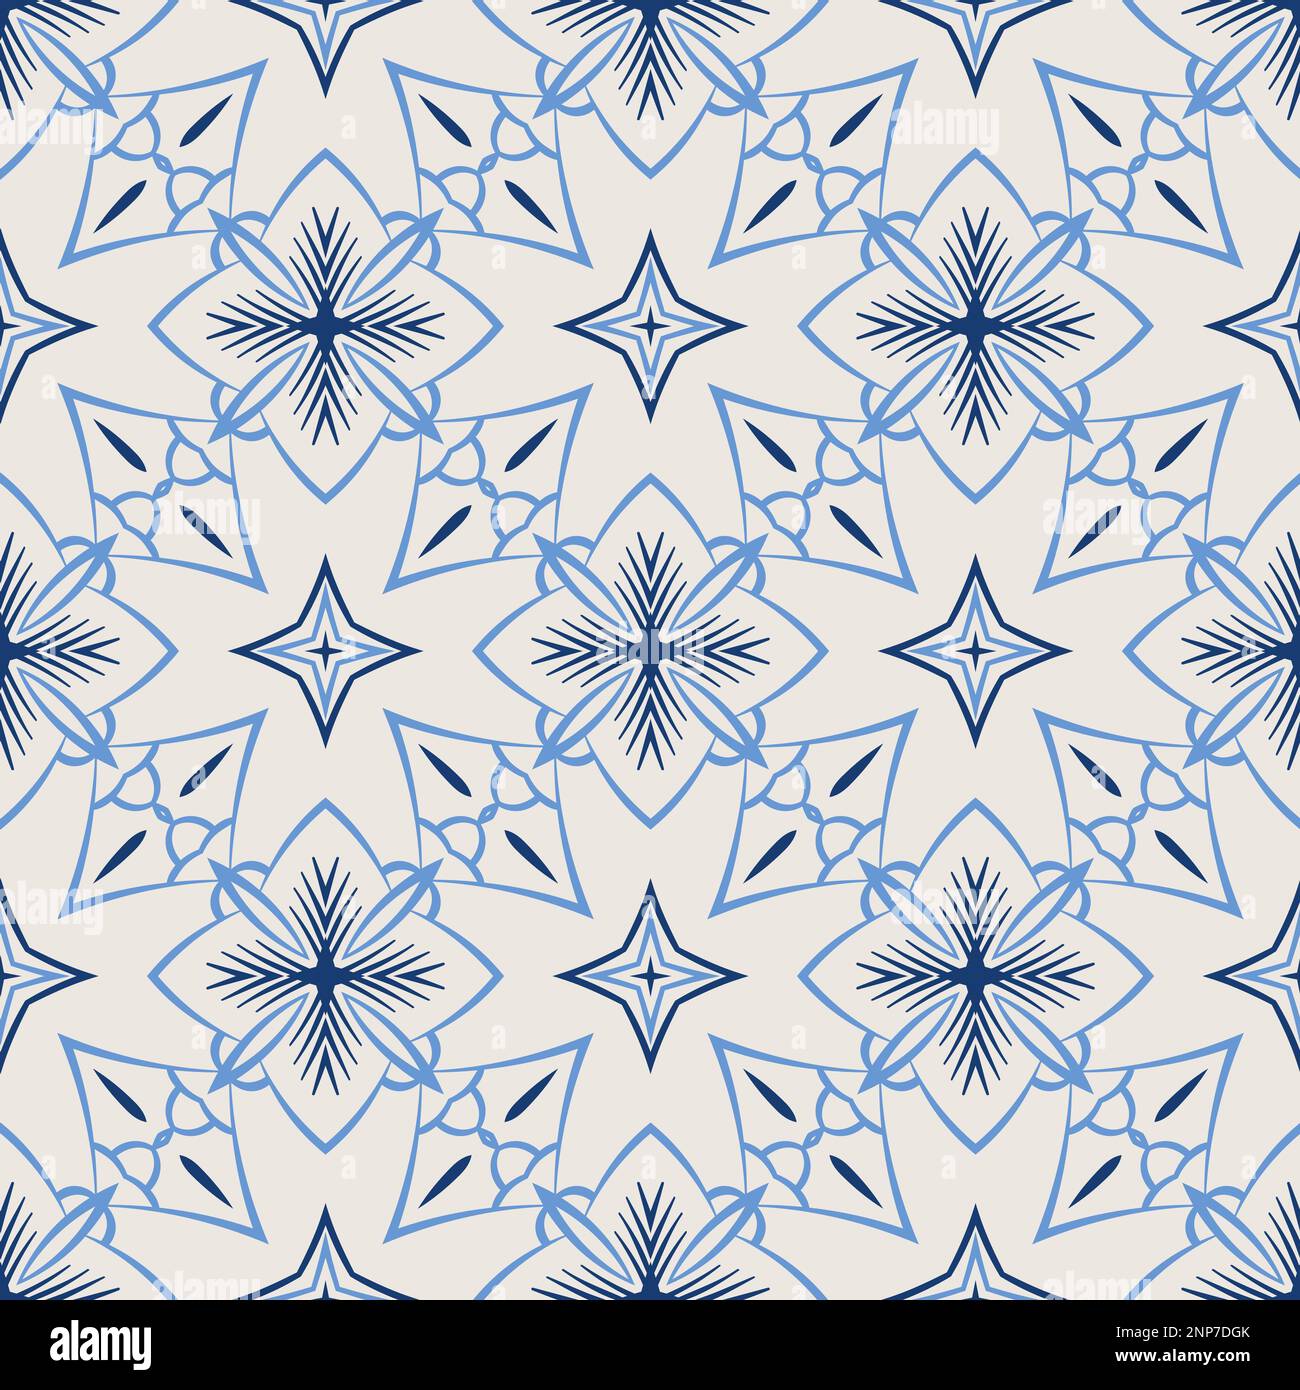 Vintage tile pattern. Seamless blue and white background with flower design Stock Vector